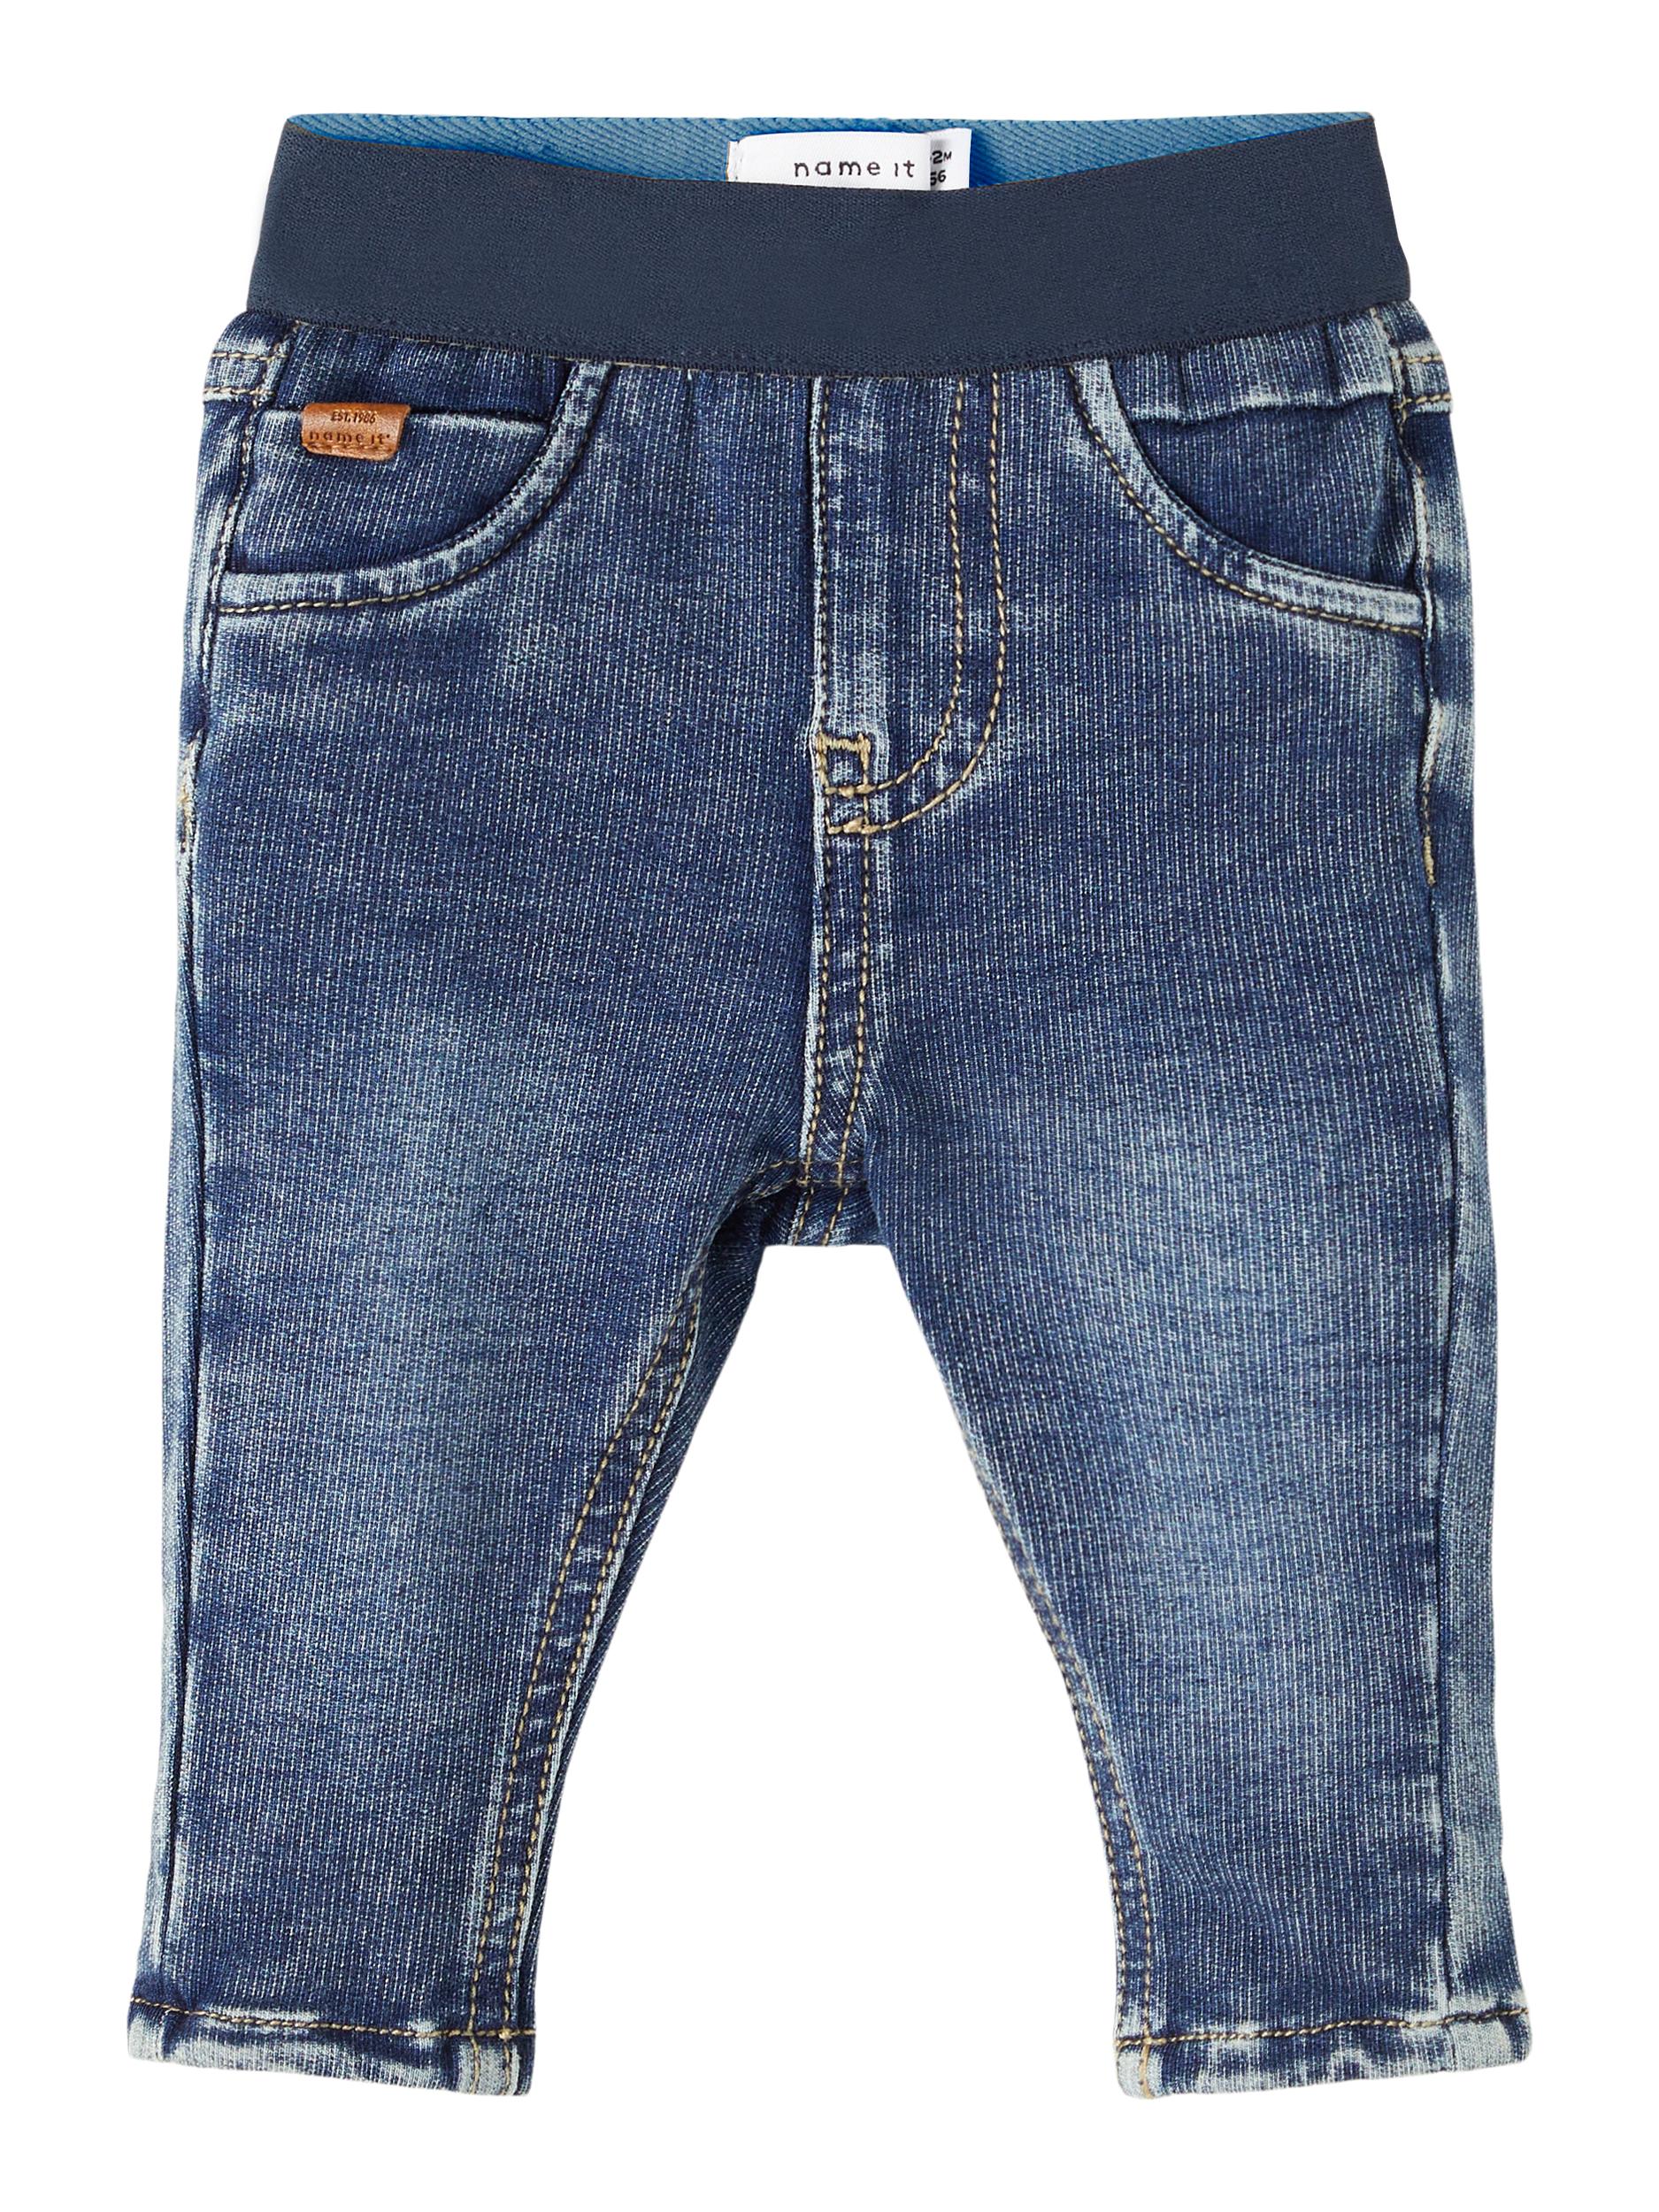 Boy's Newborn Silas Jeans 1055-Front View